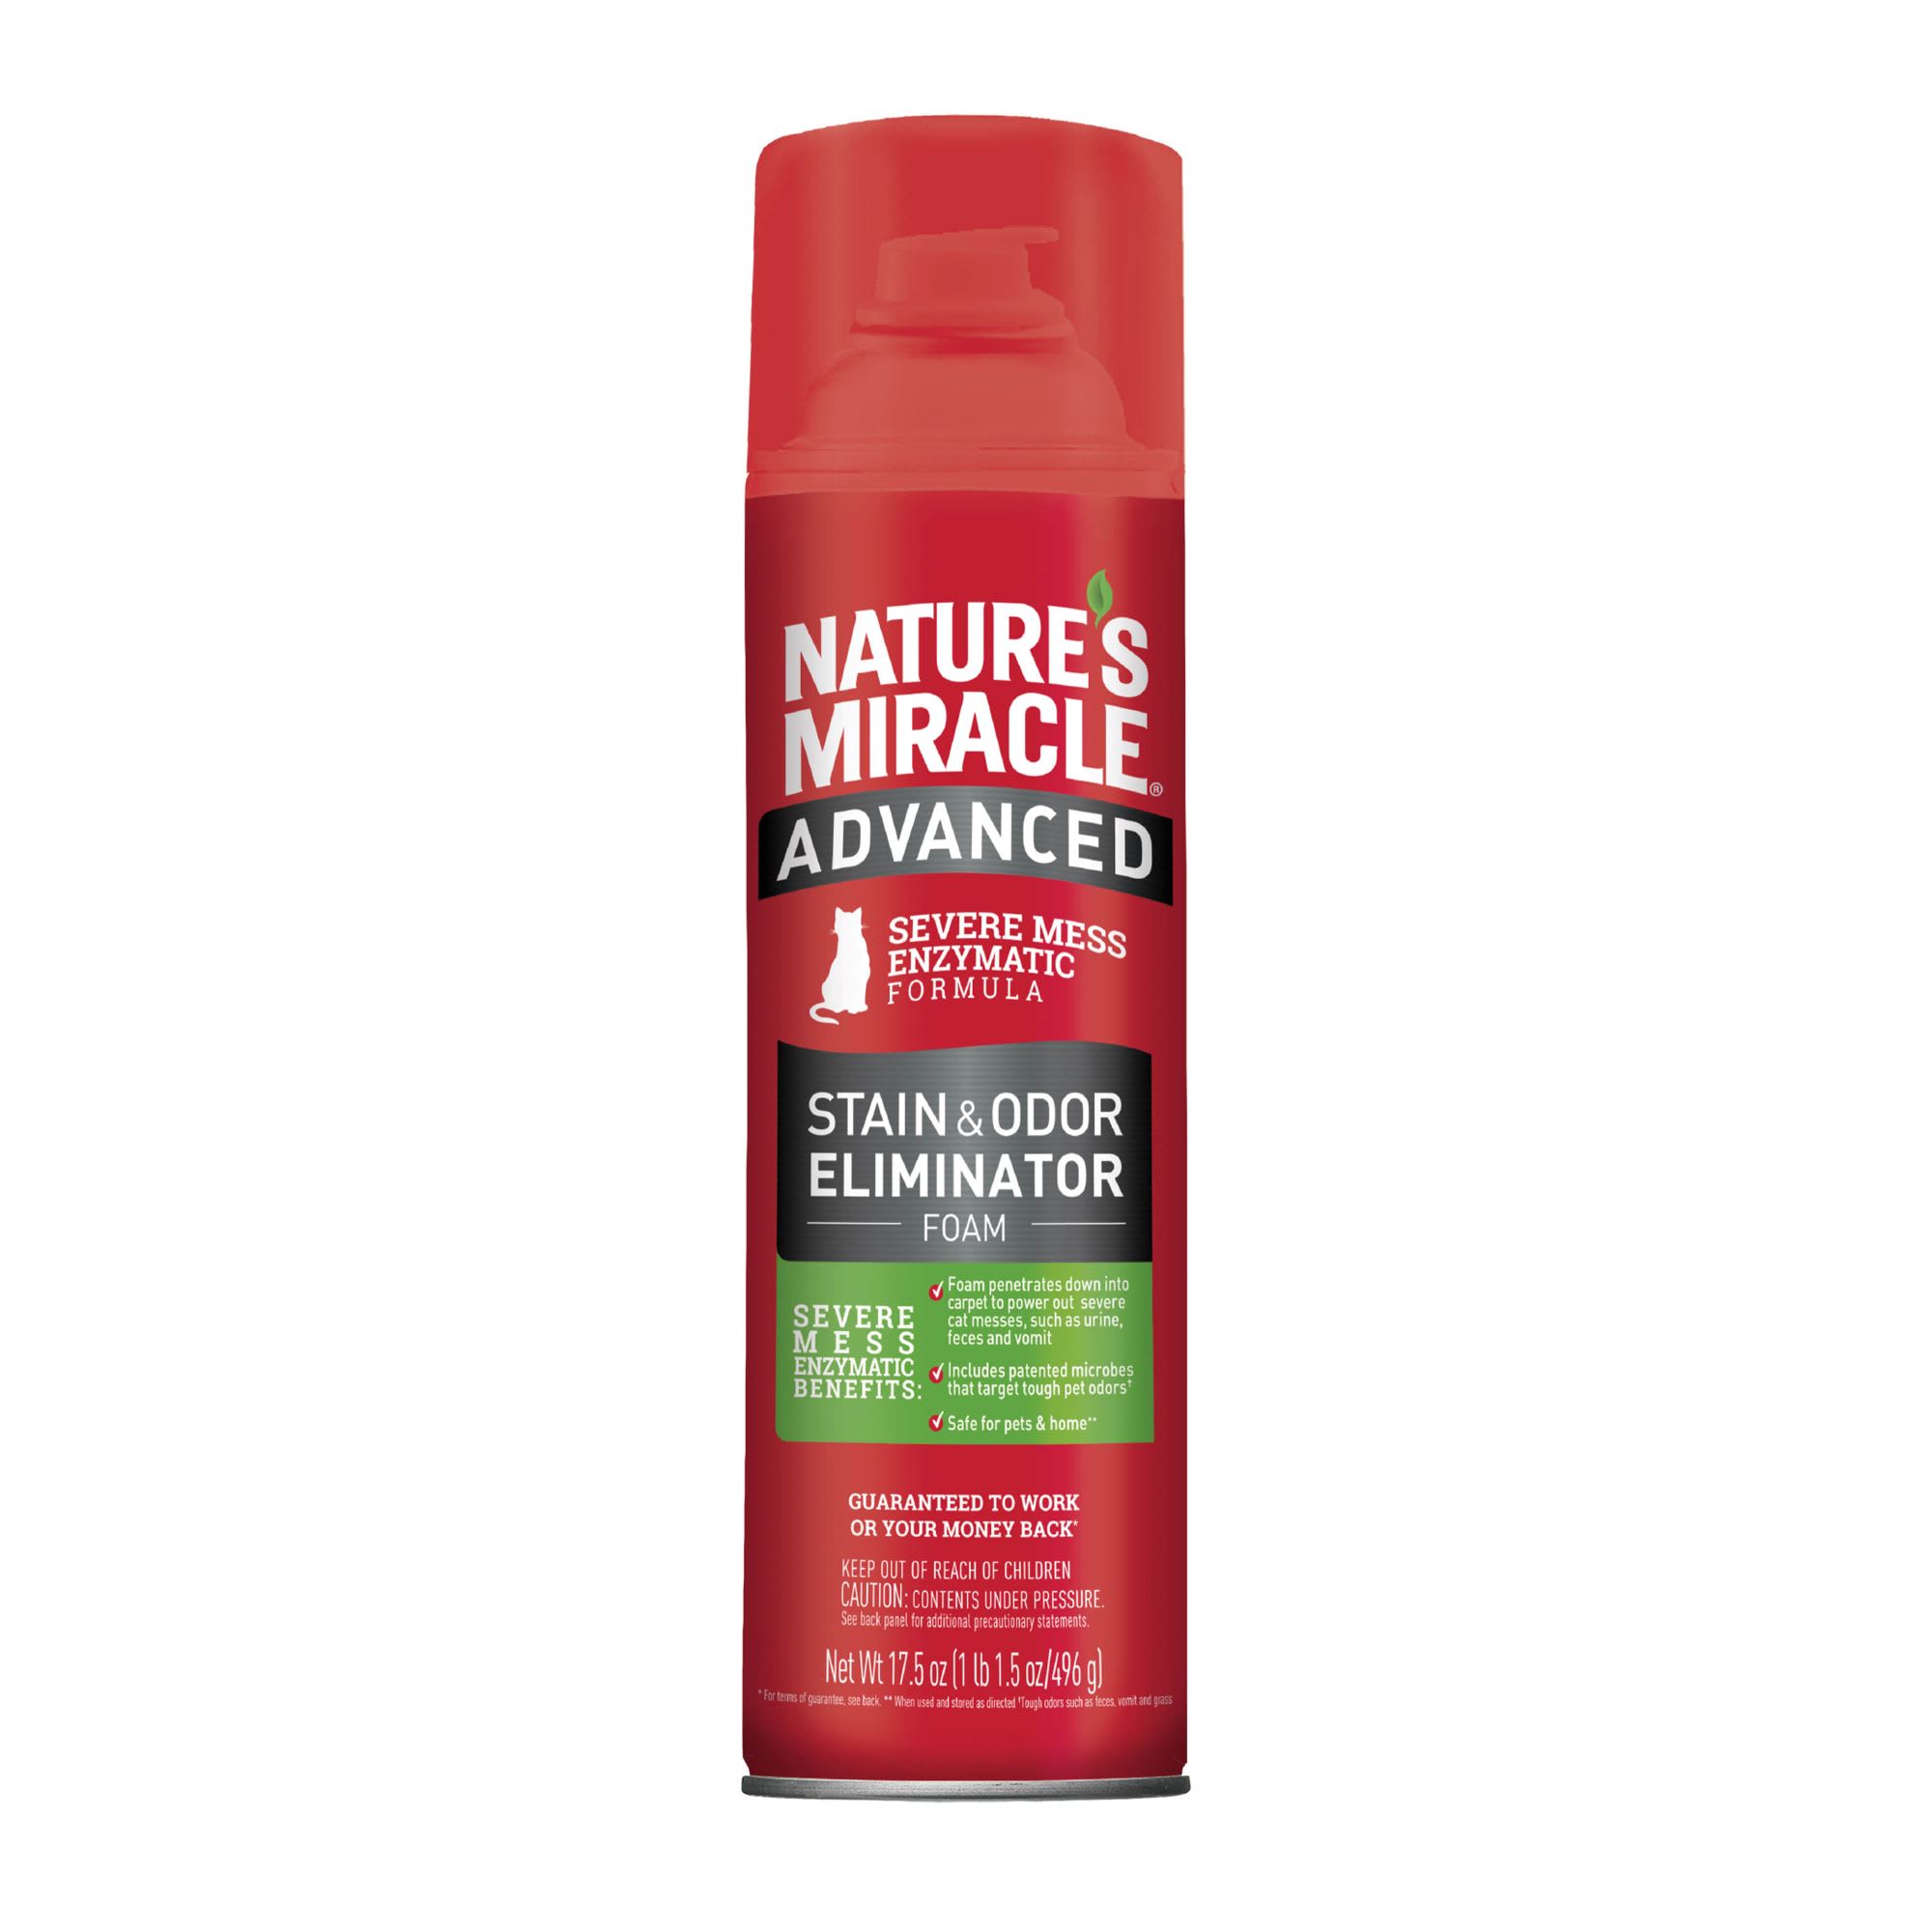 nature's miracle stain and odor remover